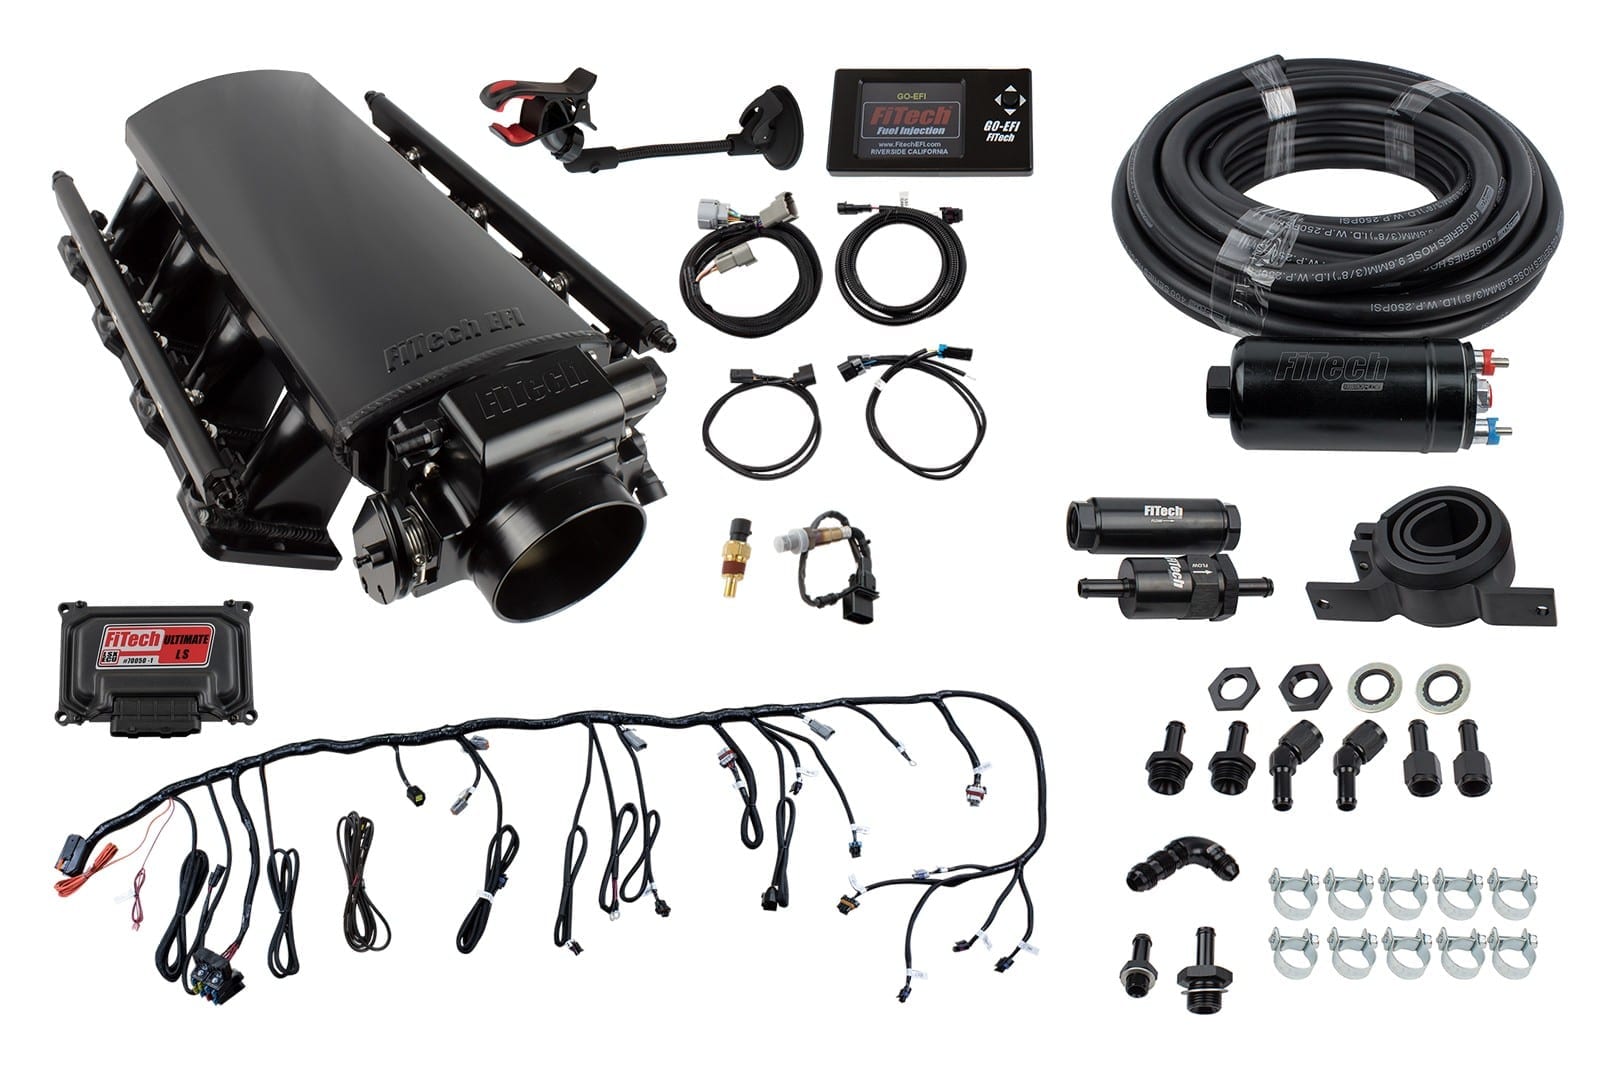 FiTech 71006 Ultimate LS Truck Kit (500HP/No Trans Control/Inline Fuel Pump/Cathedral Port)